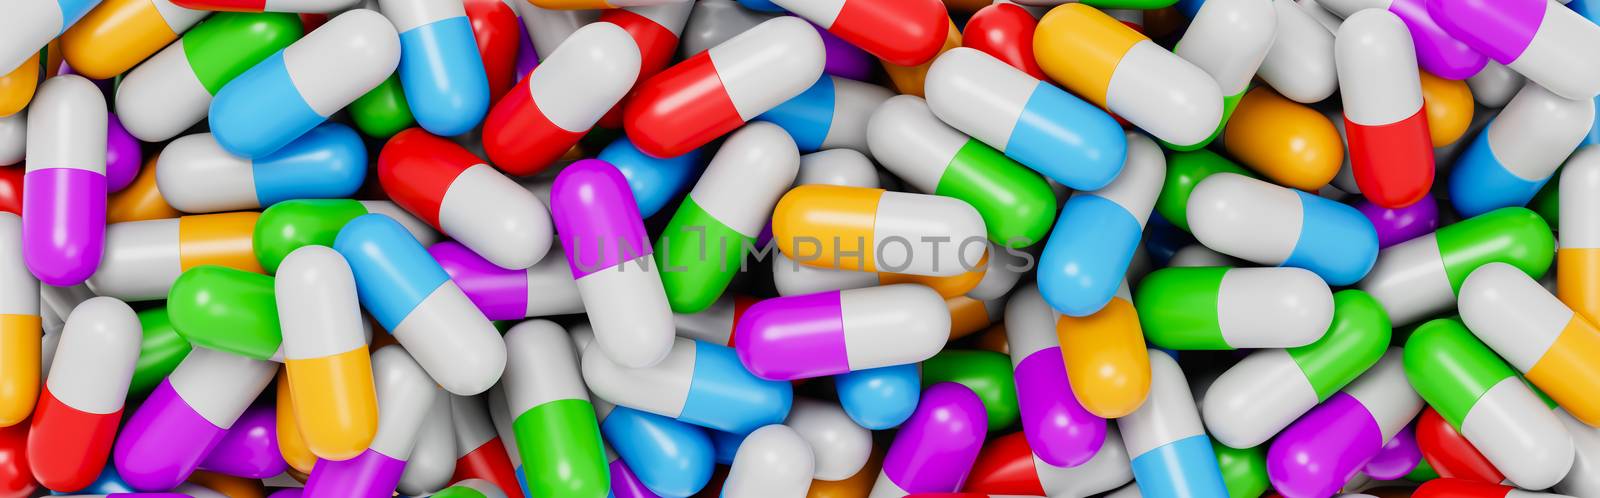 Wall of Colorful Pills by make